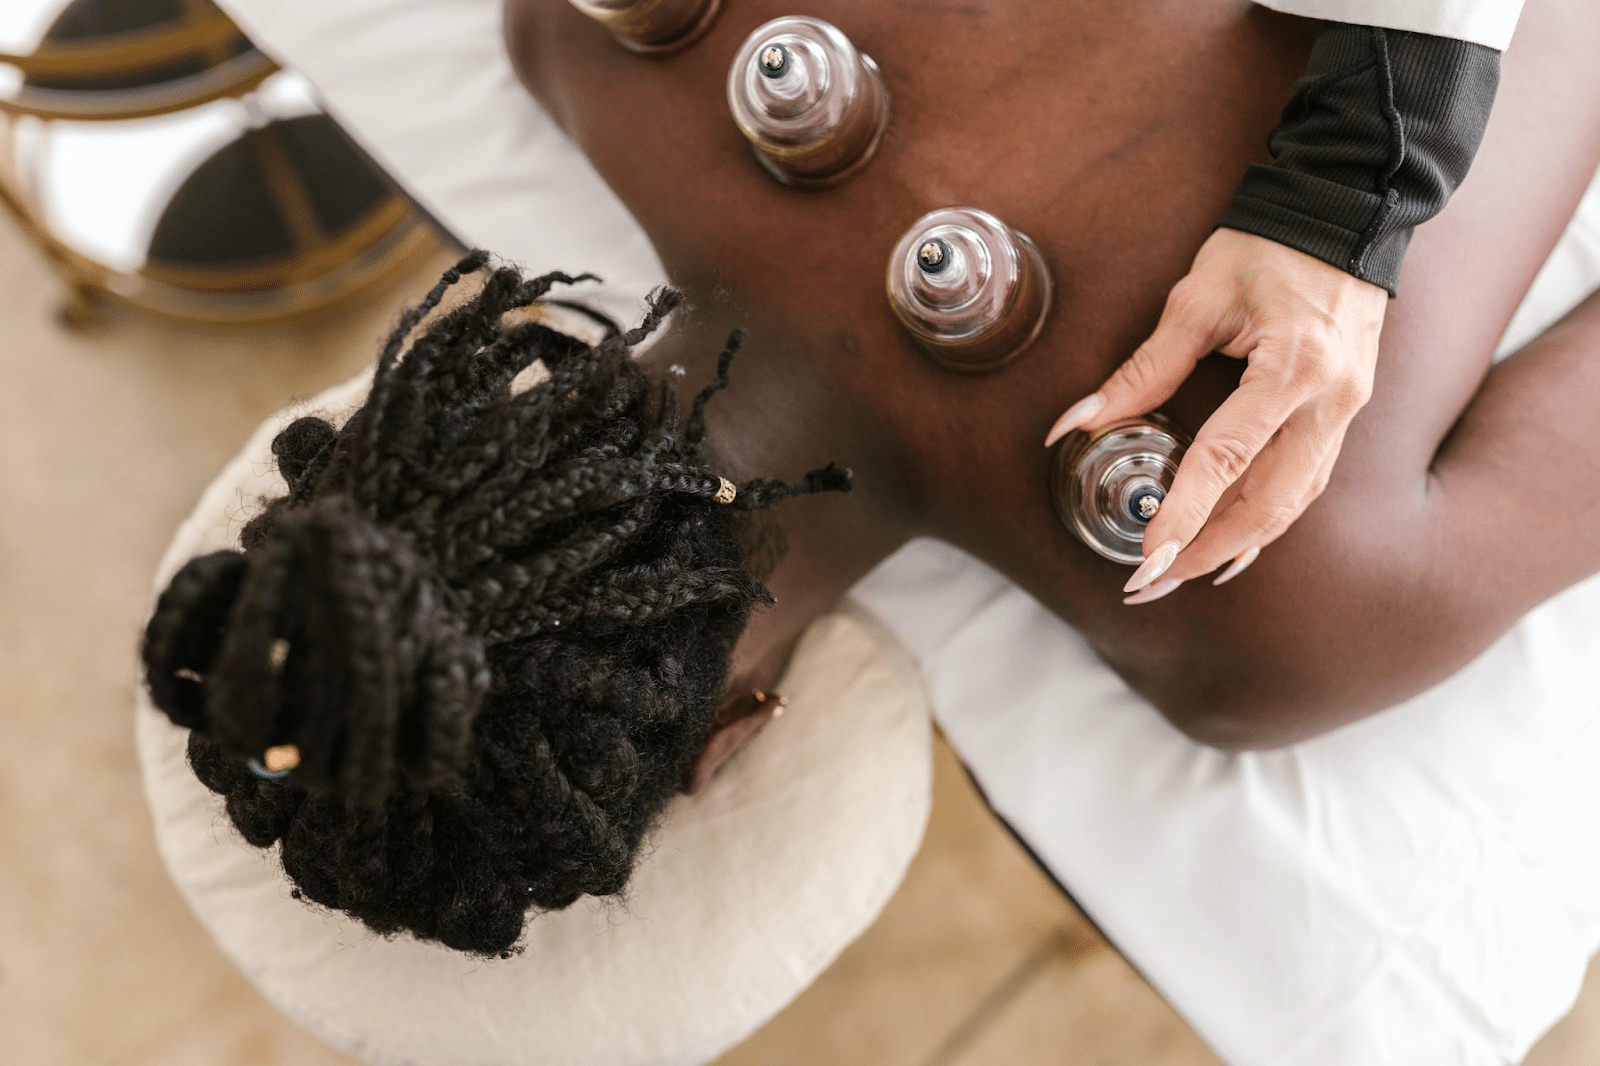 woman receives cupping therapy on her back from professional therapist